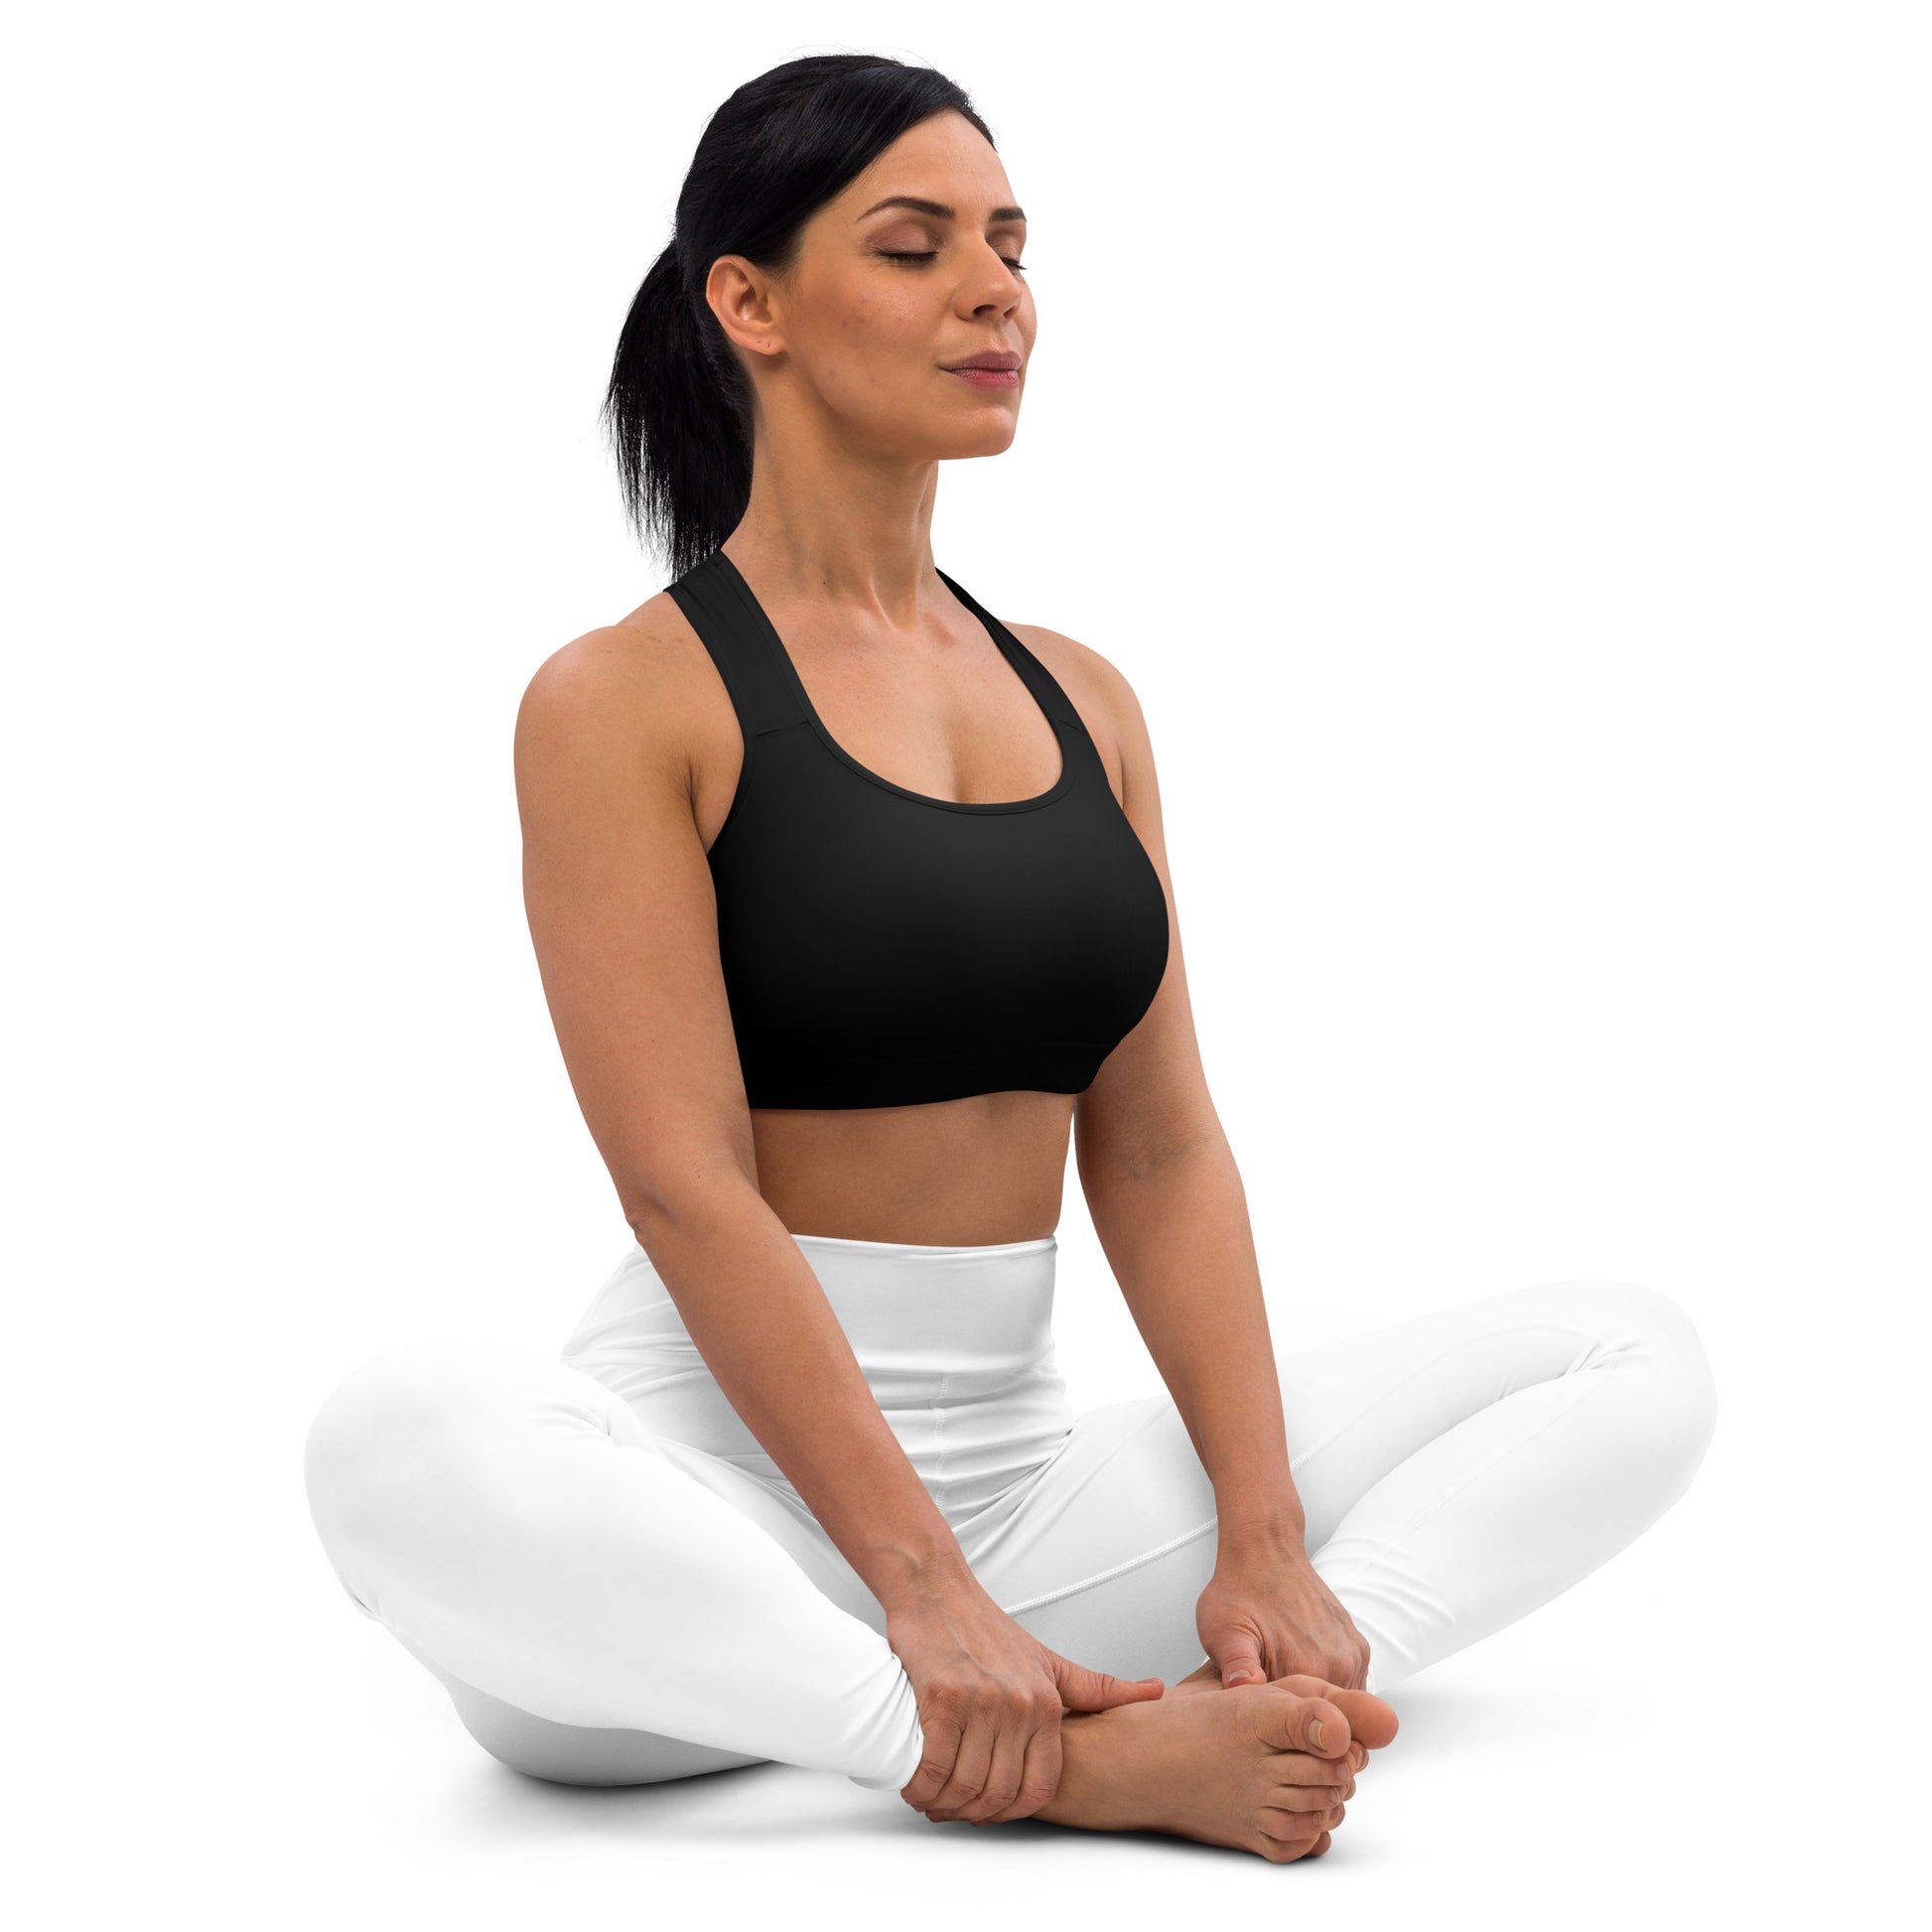 A picture of a women on the floor in a yoga pose wearing a Black padded sports bra - crop top - right side